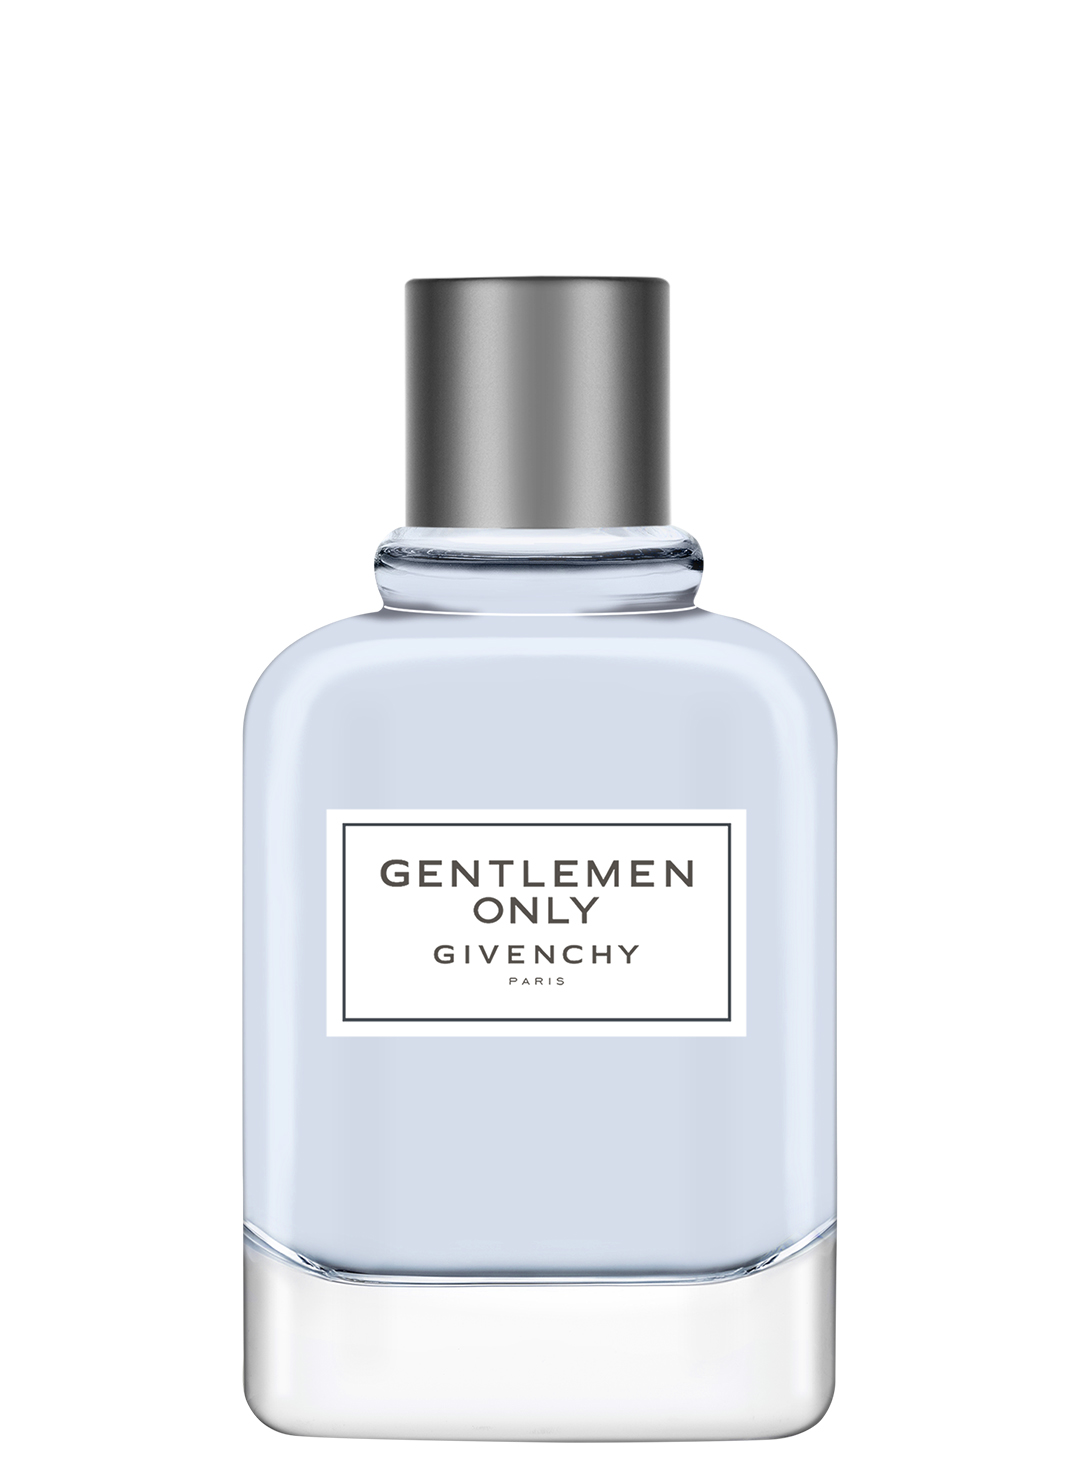 gentlemen only givenchy 100ml price